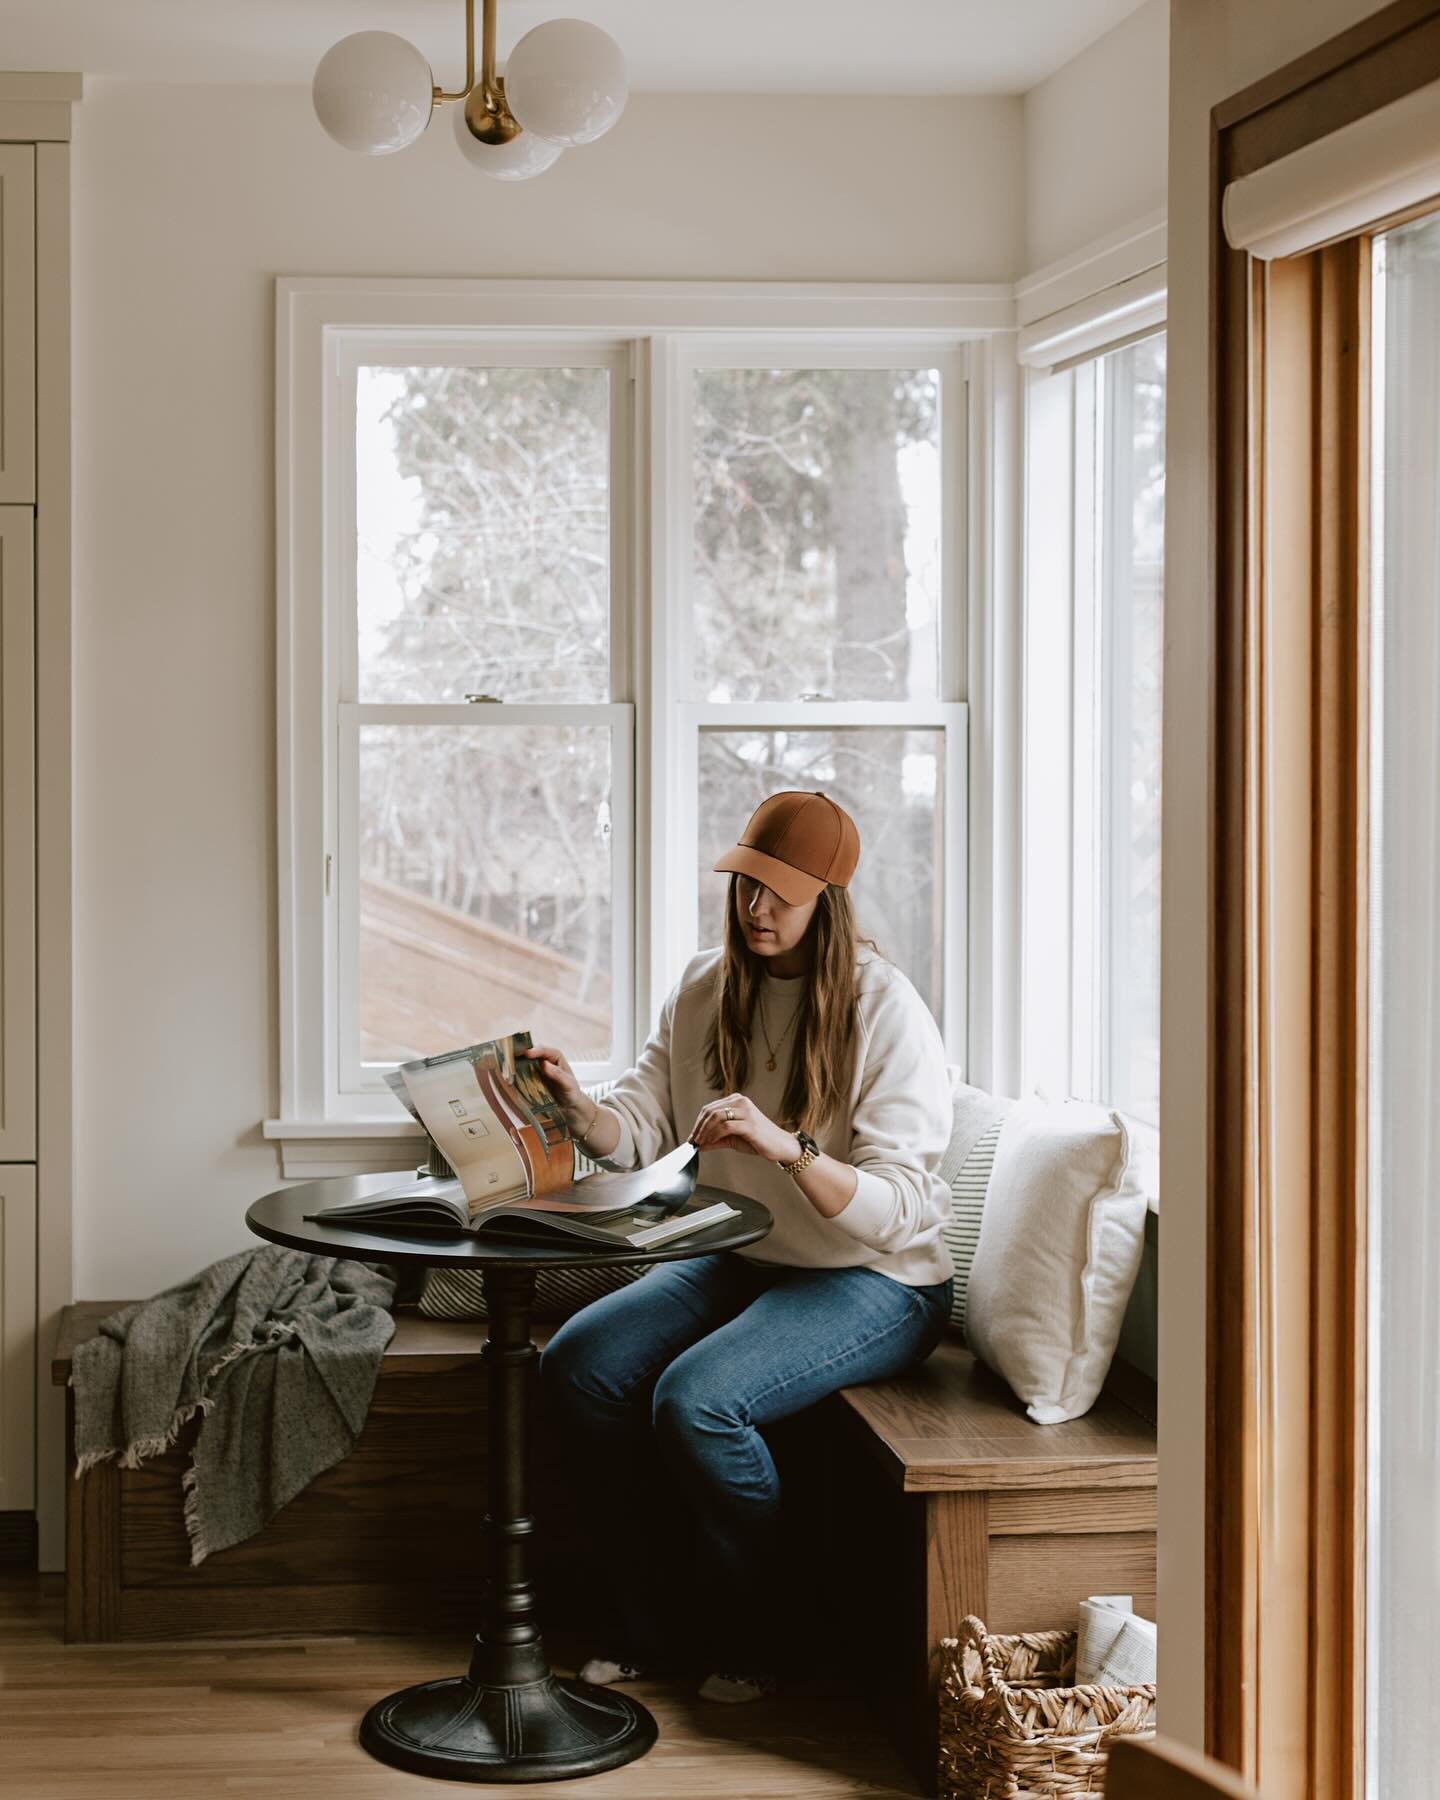 Going to pretend I&rsquo;m sitting in this sweet little nook casually looking at design books instead of nervously watching @edmontonoilers and wondering how I&rsquo;ll possibly stay up past 10pm on a Sunday to watch the full game&hellip;

Project: #